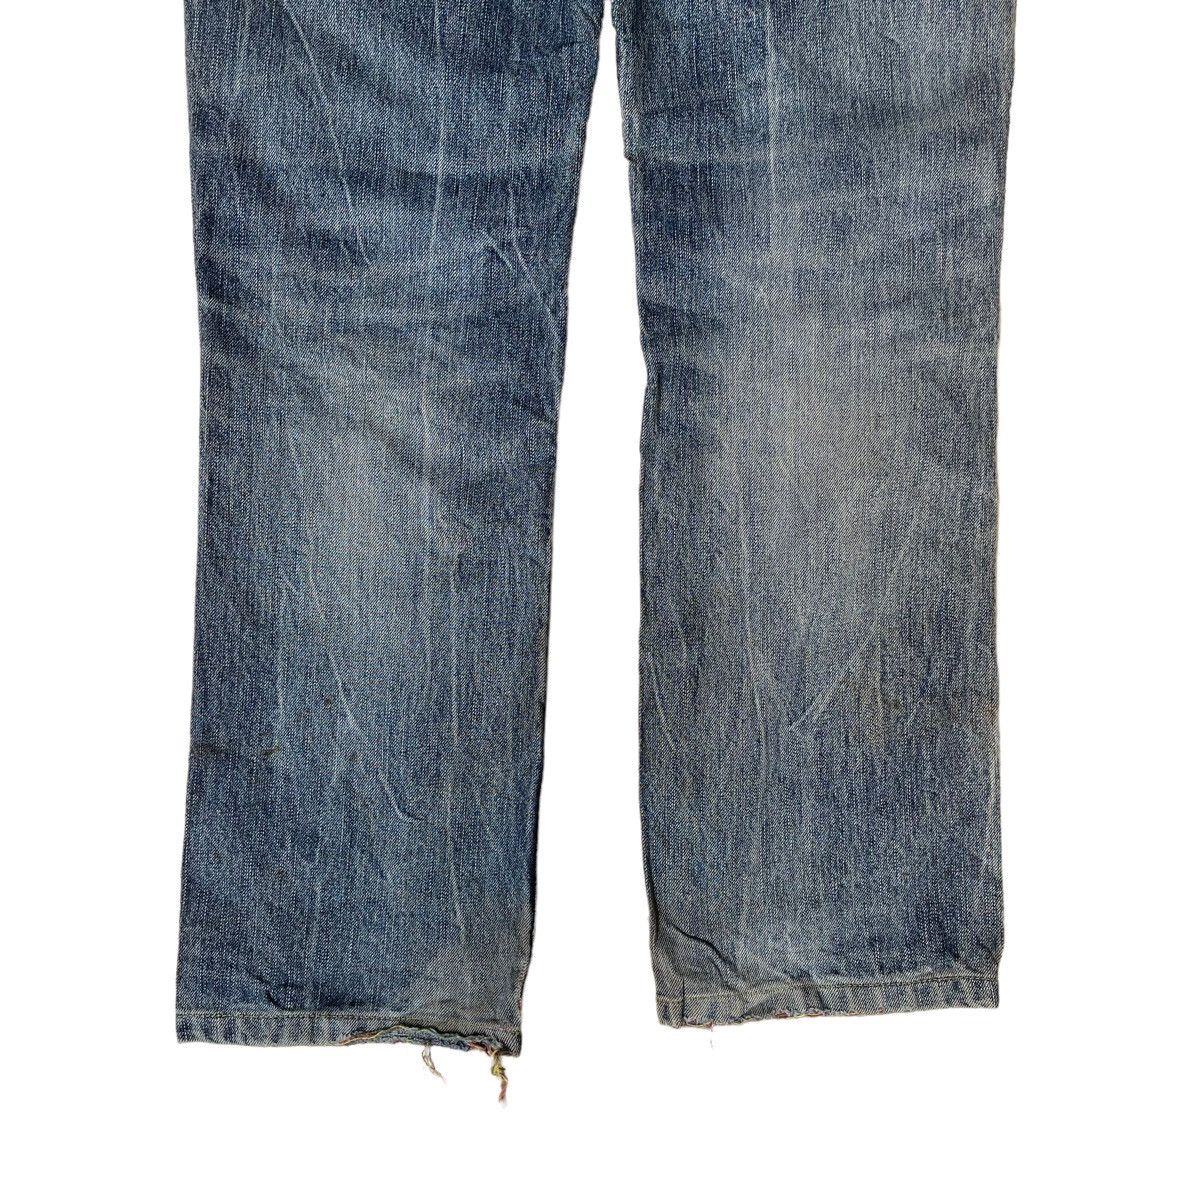 ✅BINDING NOW✅ Japanese Cloud72 Skull Jeans Disteressed Rare - 10